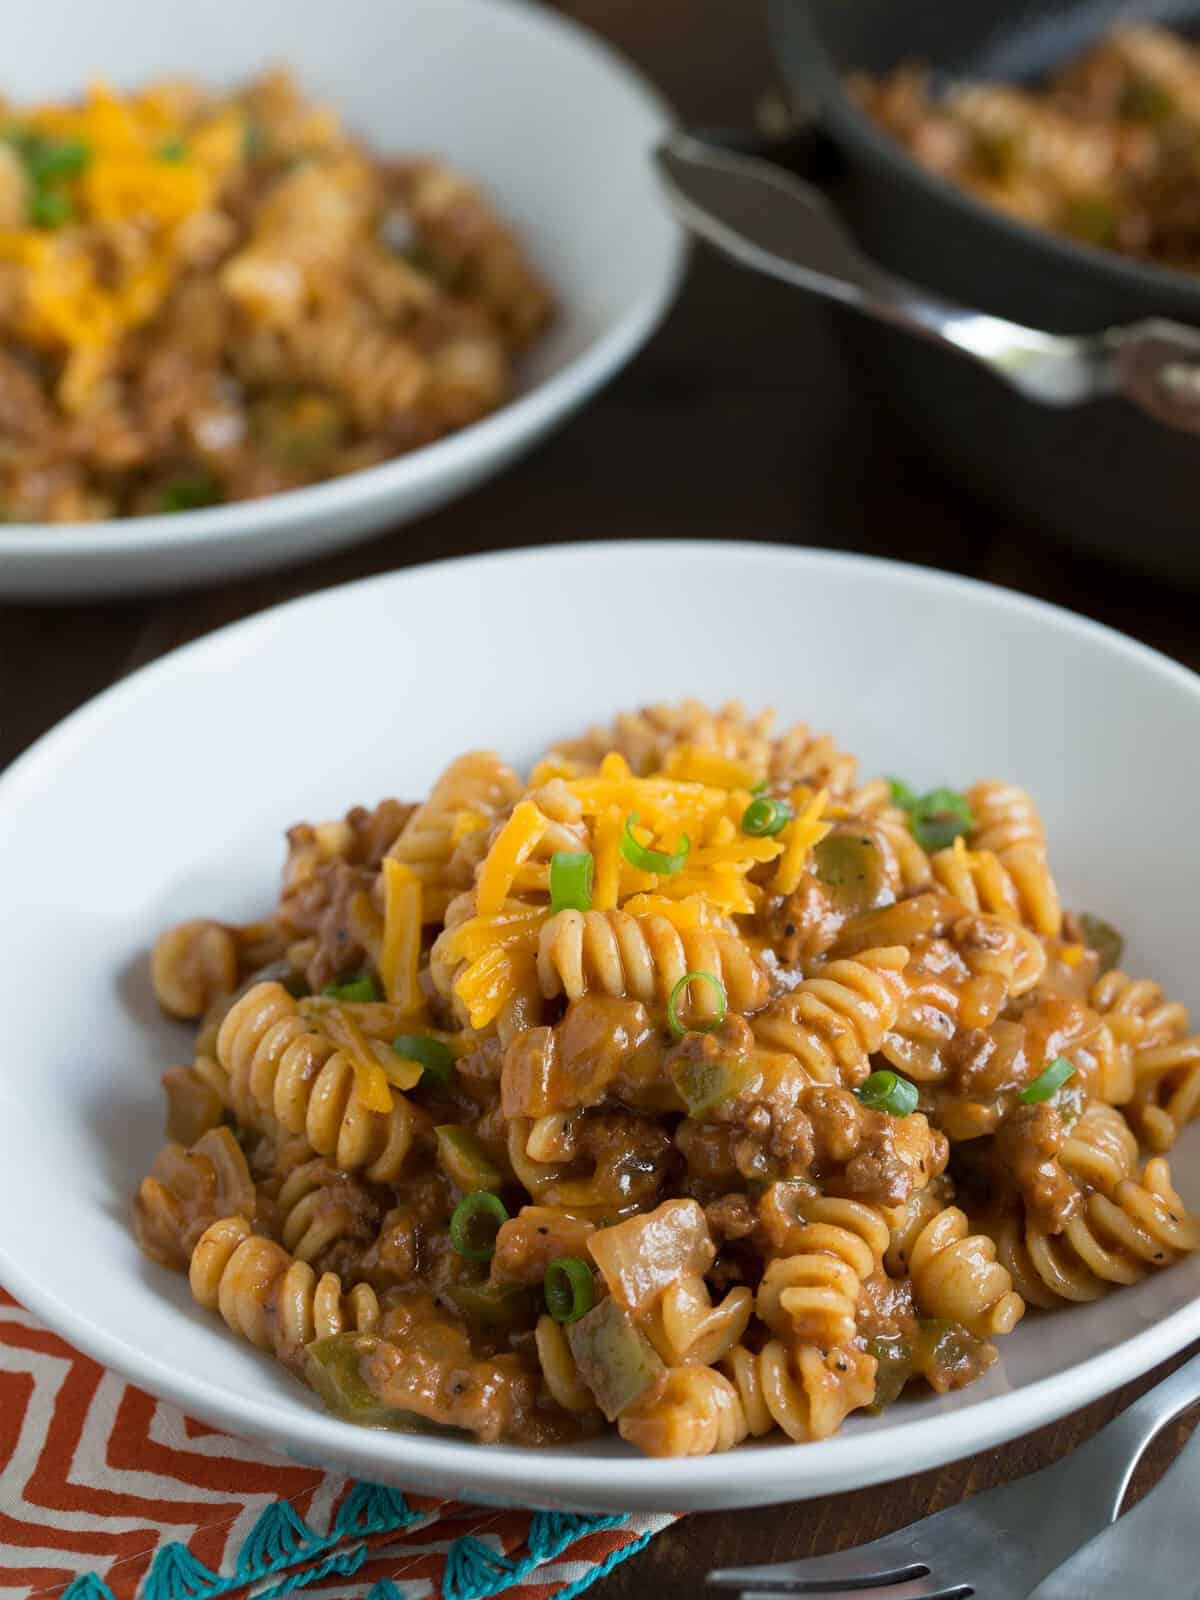 Sloppy Joe mac 'n cheese is going to be your family's new favorite weeknight meal! It's so easy to put together and packed with LOTS of flavor! It's just like the traditional sandwich but FAR better and less messy to eat!